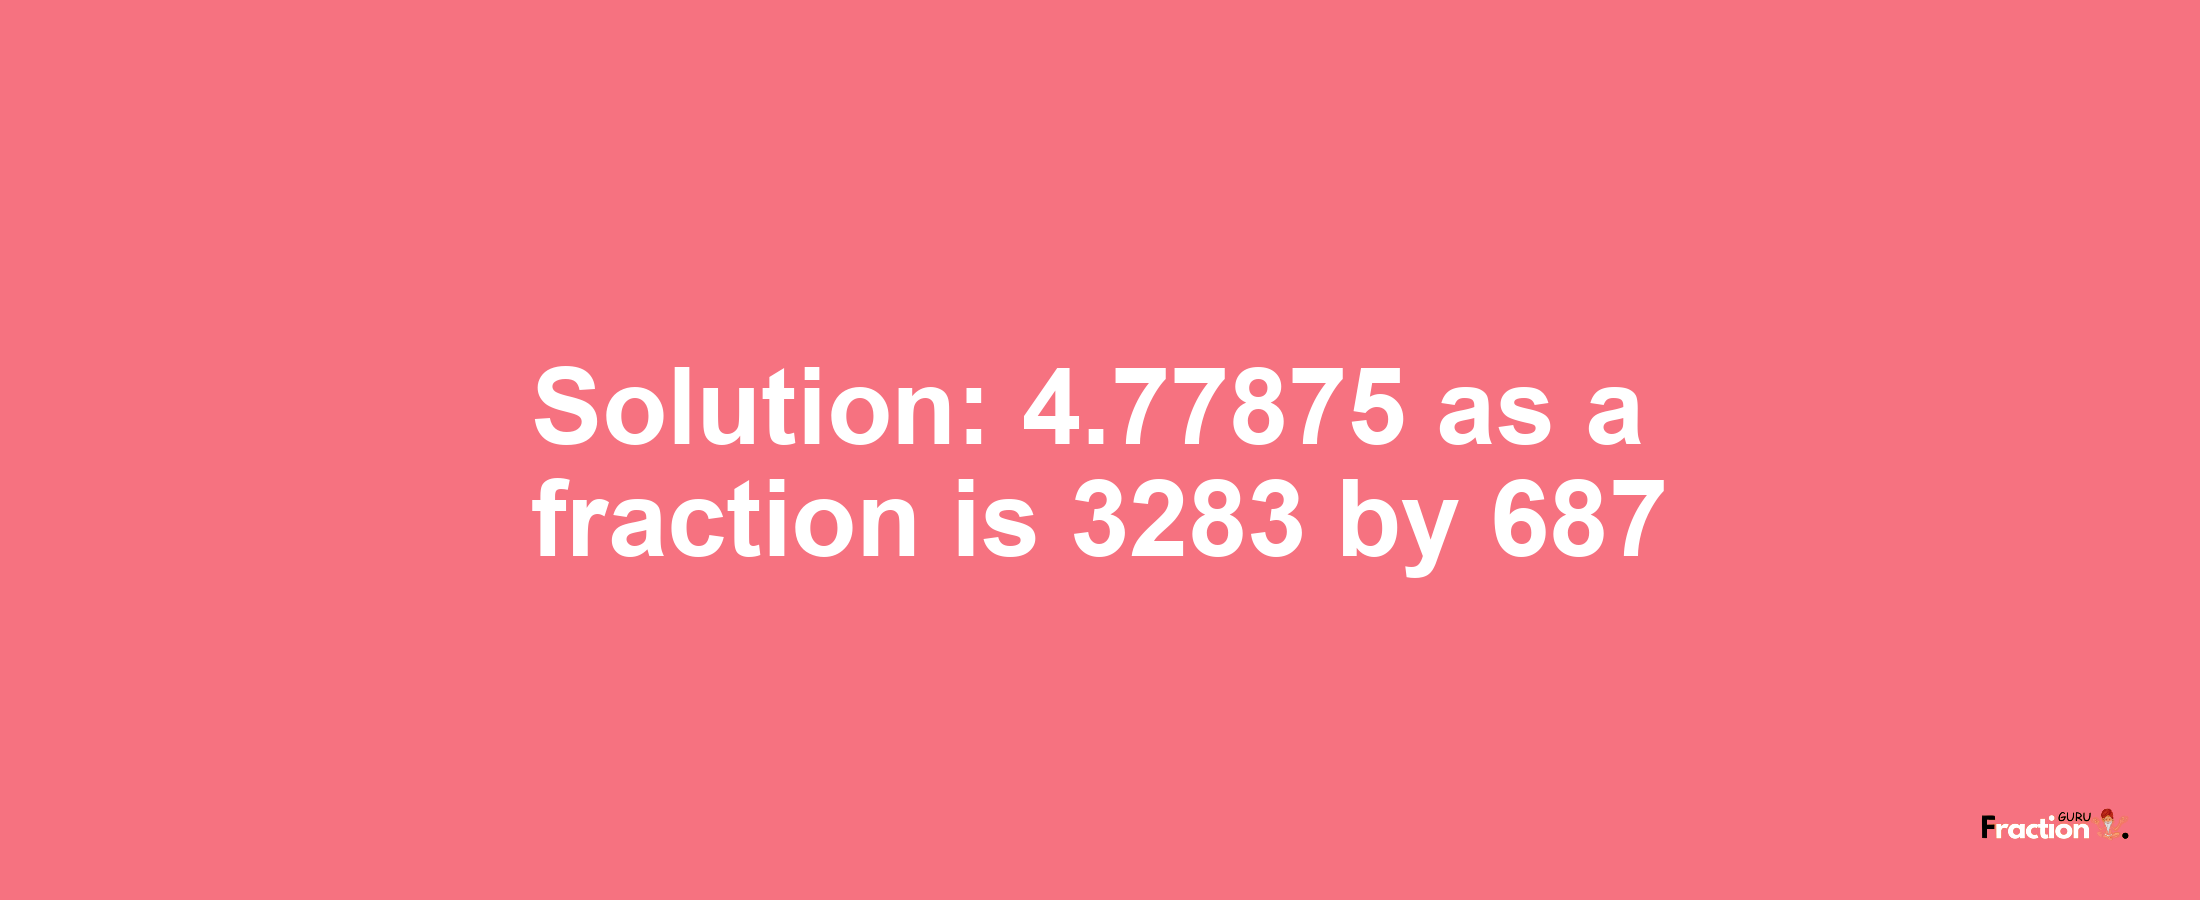 Solution:4.77875 as a fraction is 3283/687